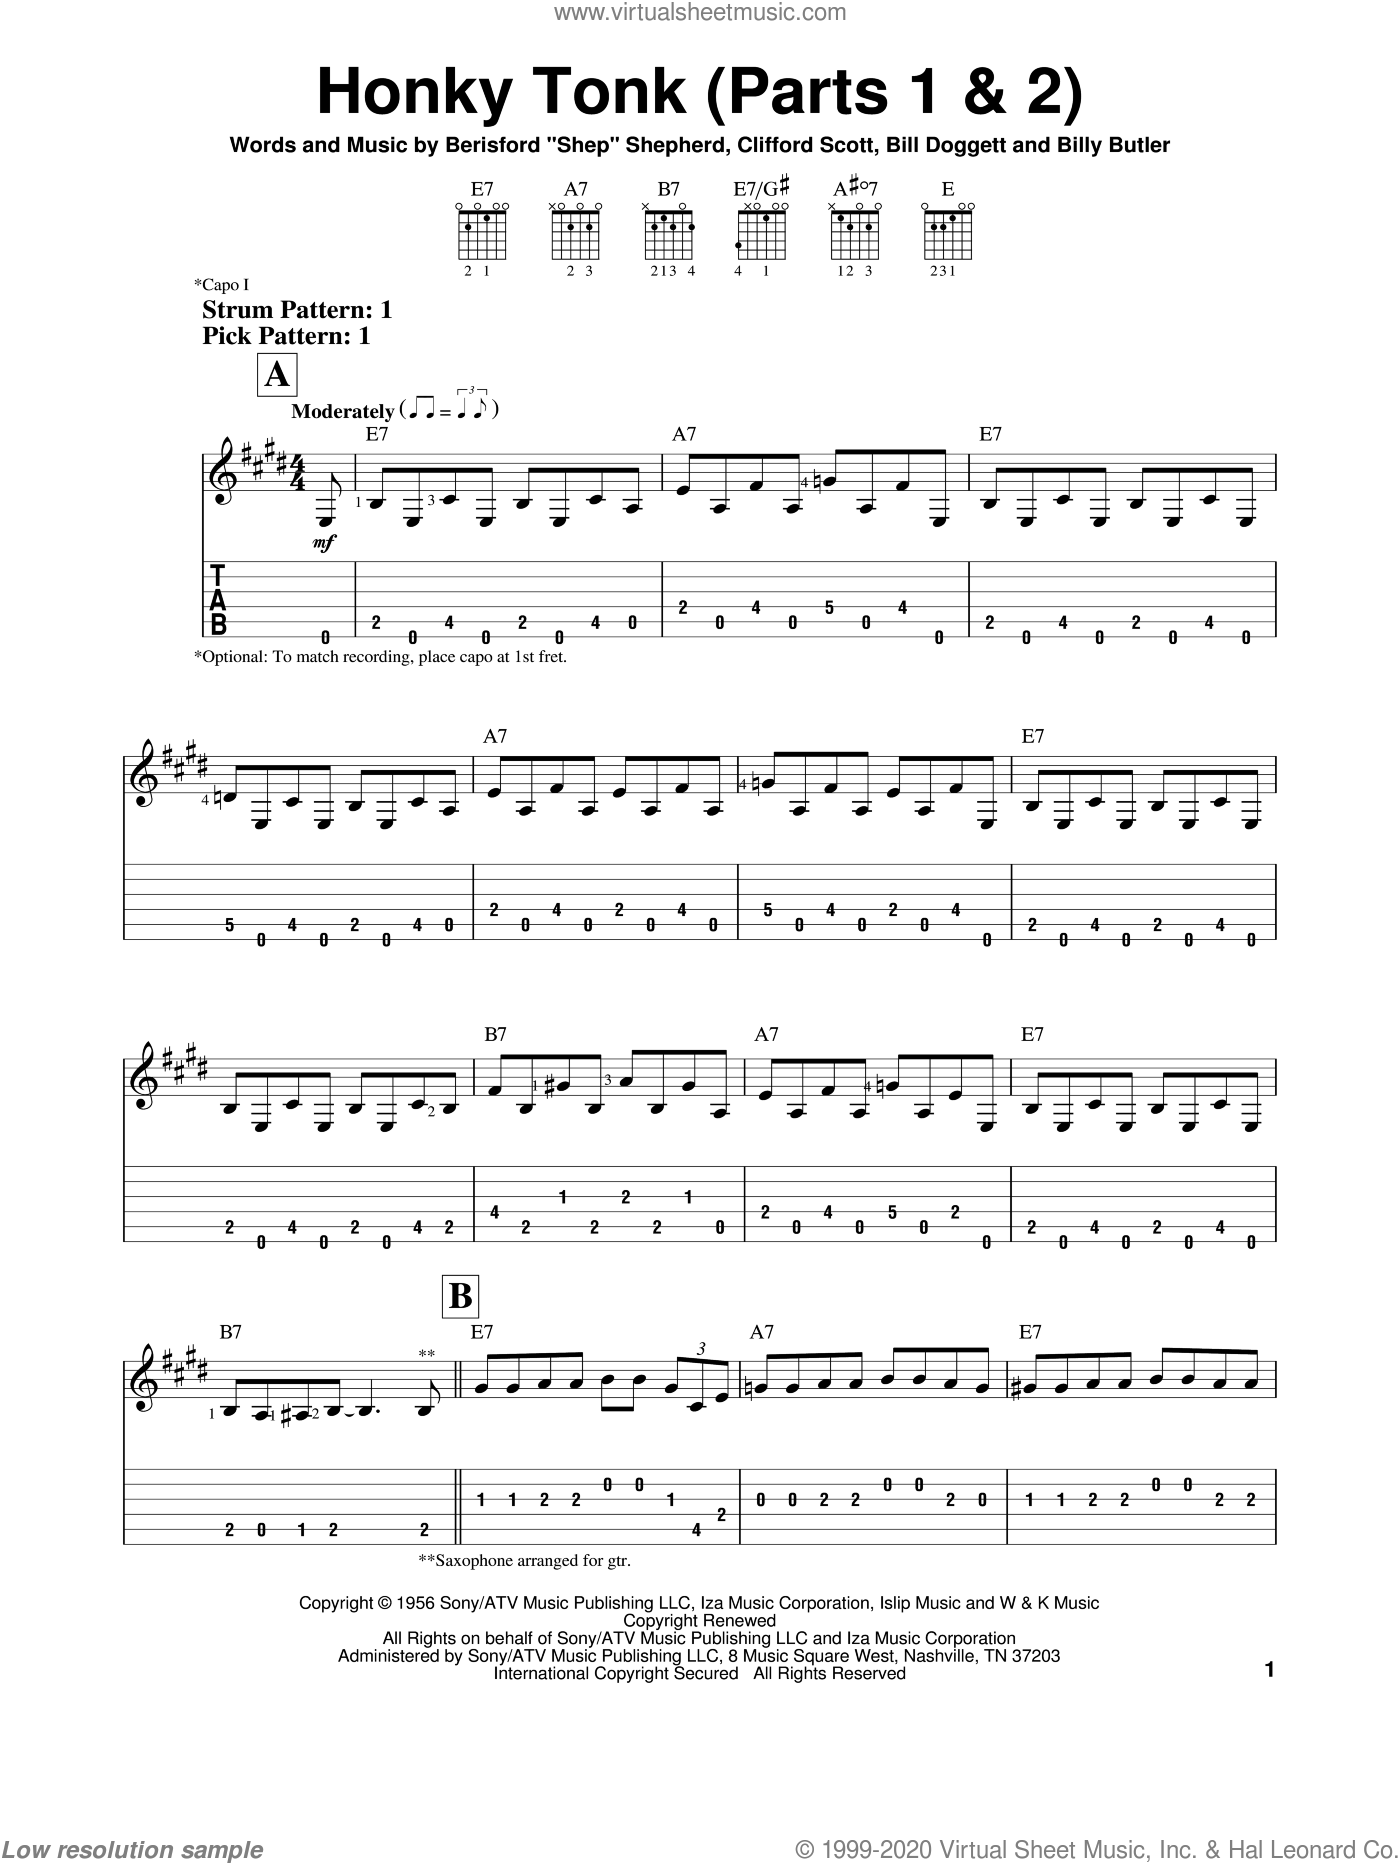 Honky Tonk (Parts 1 and 2) sheet music for guitar solo (easy